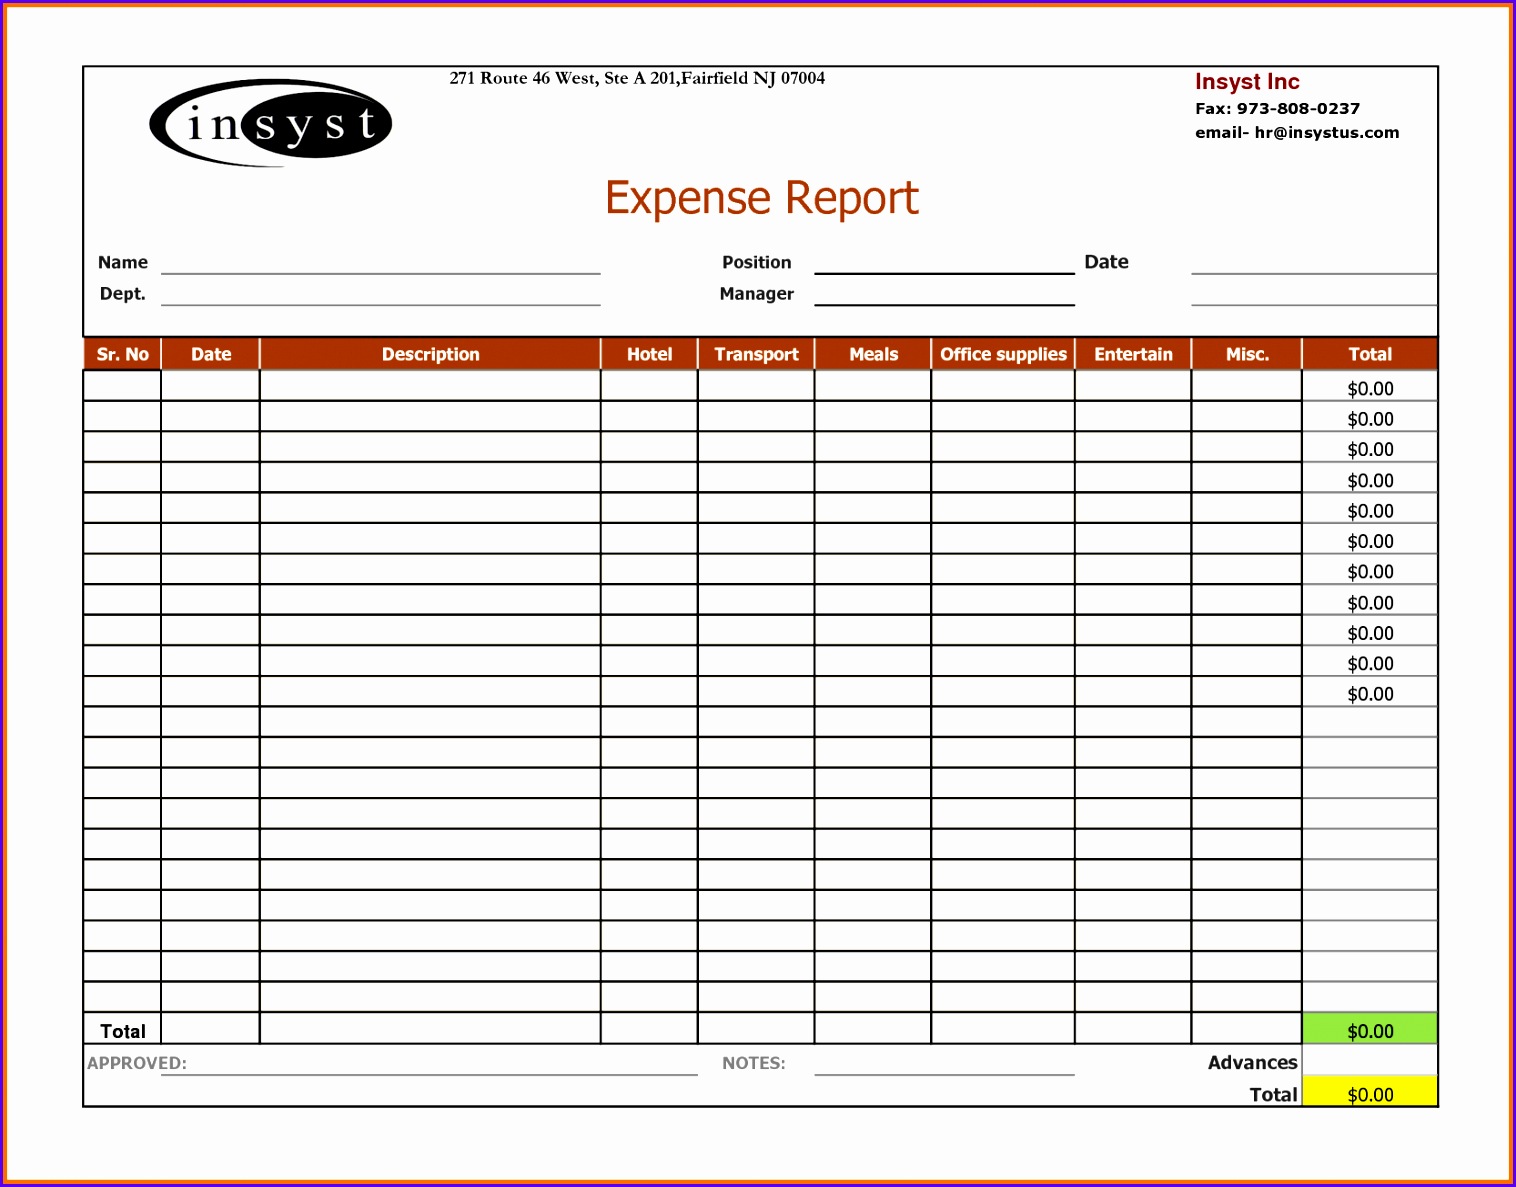 Expense Report template Excel 15161187